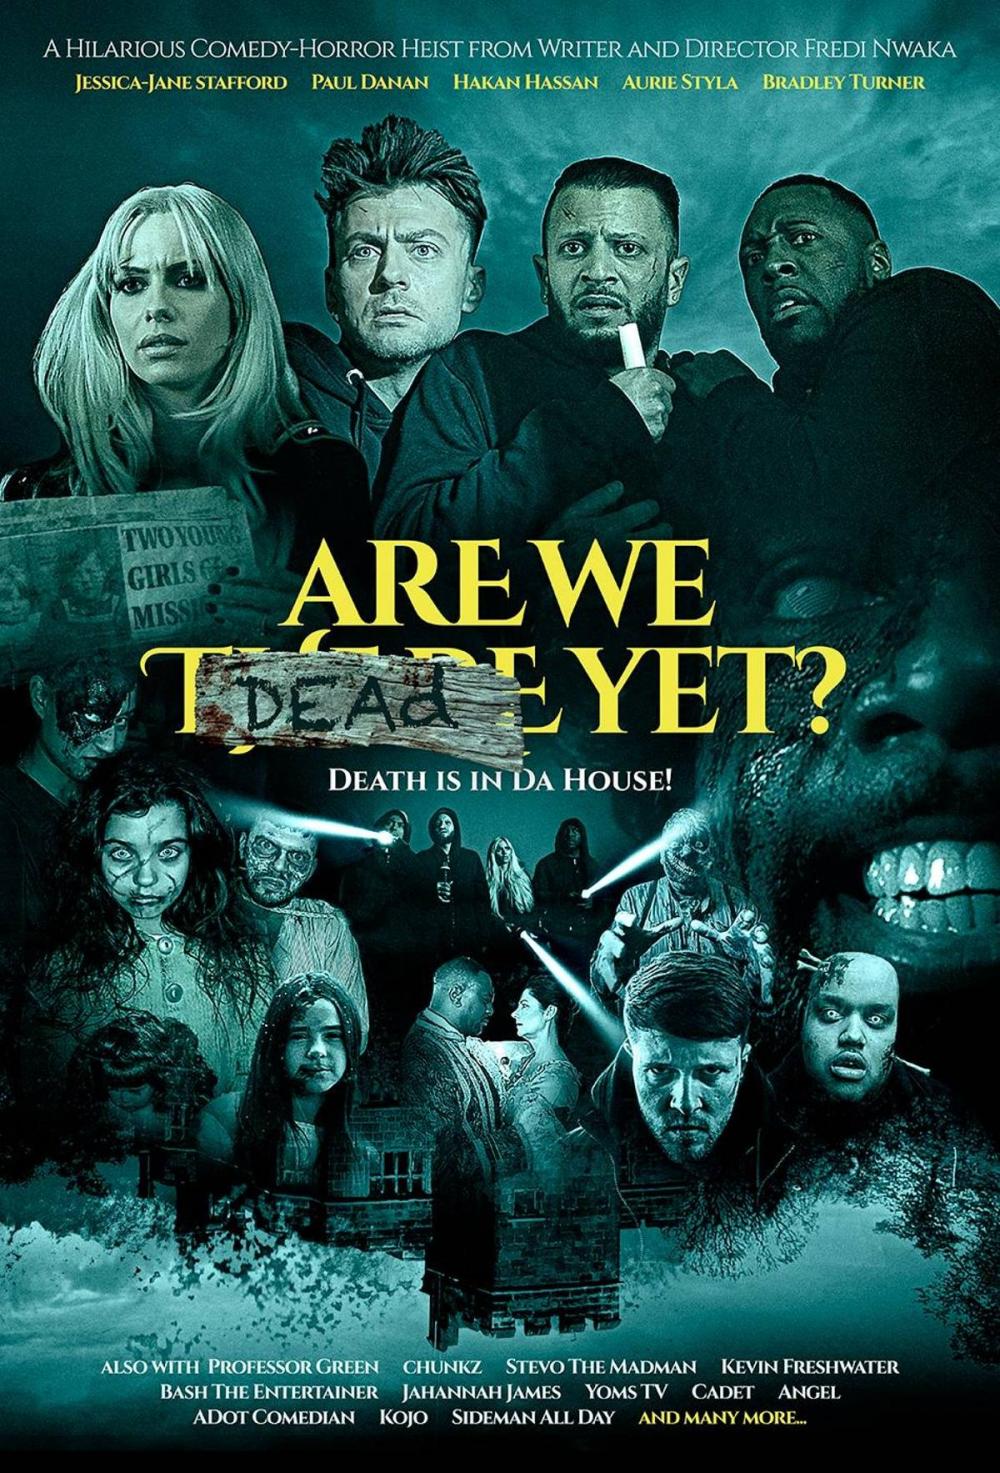 BRAND NEW Are We Dead Yet? poster